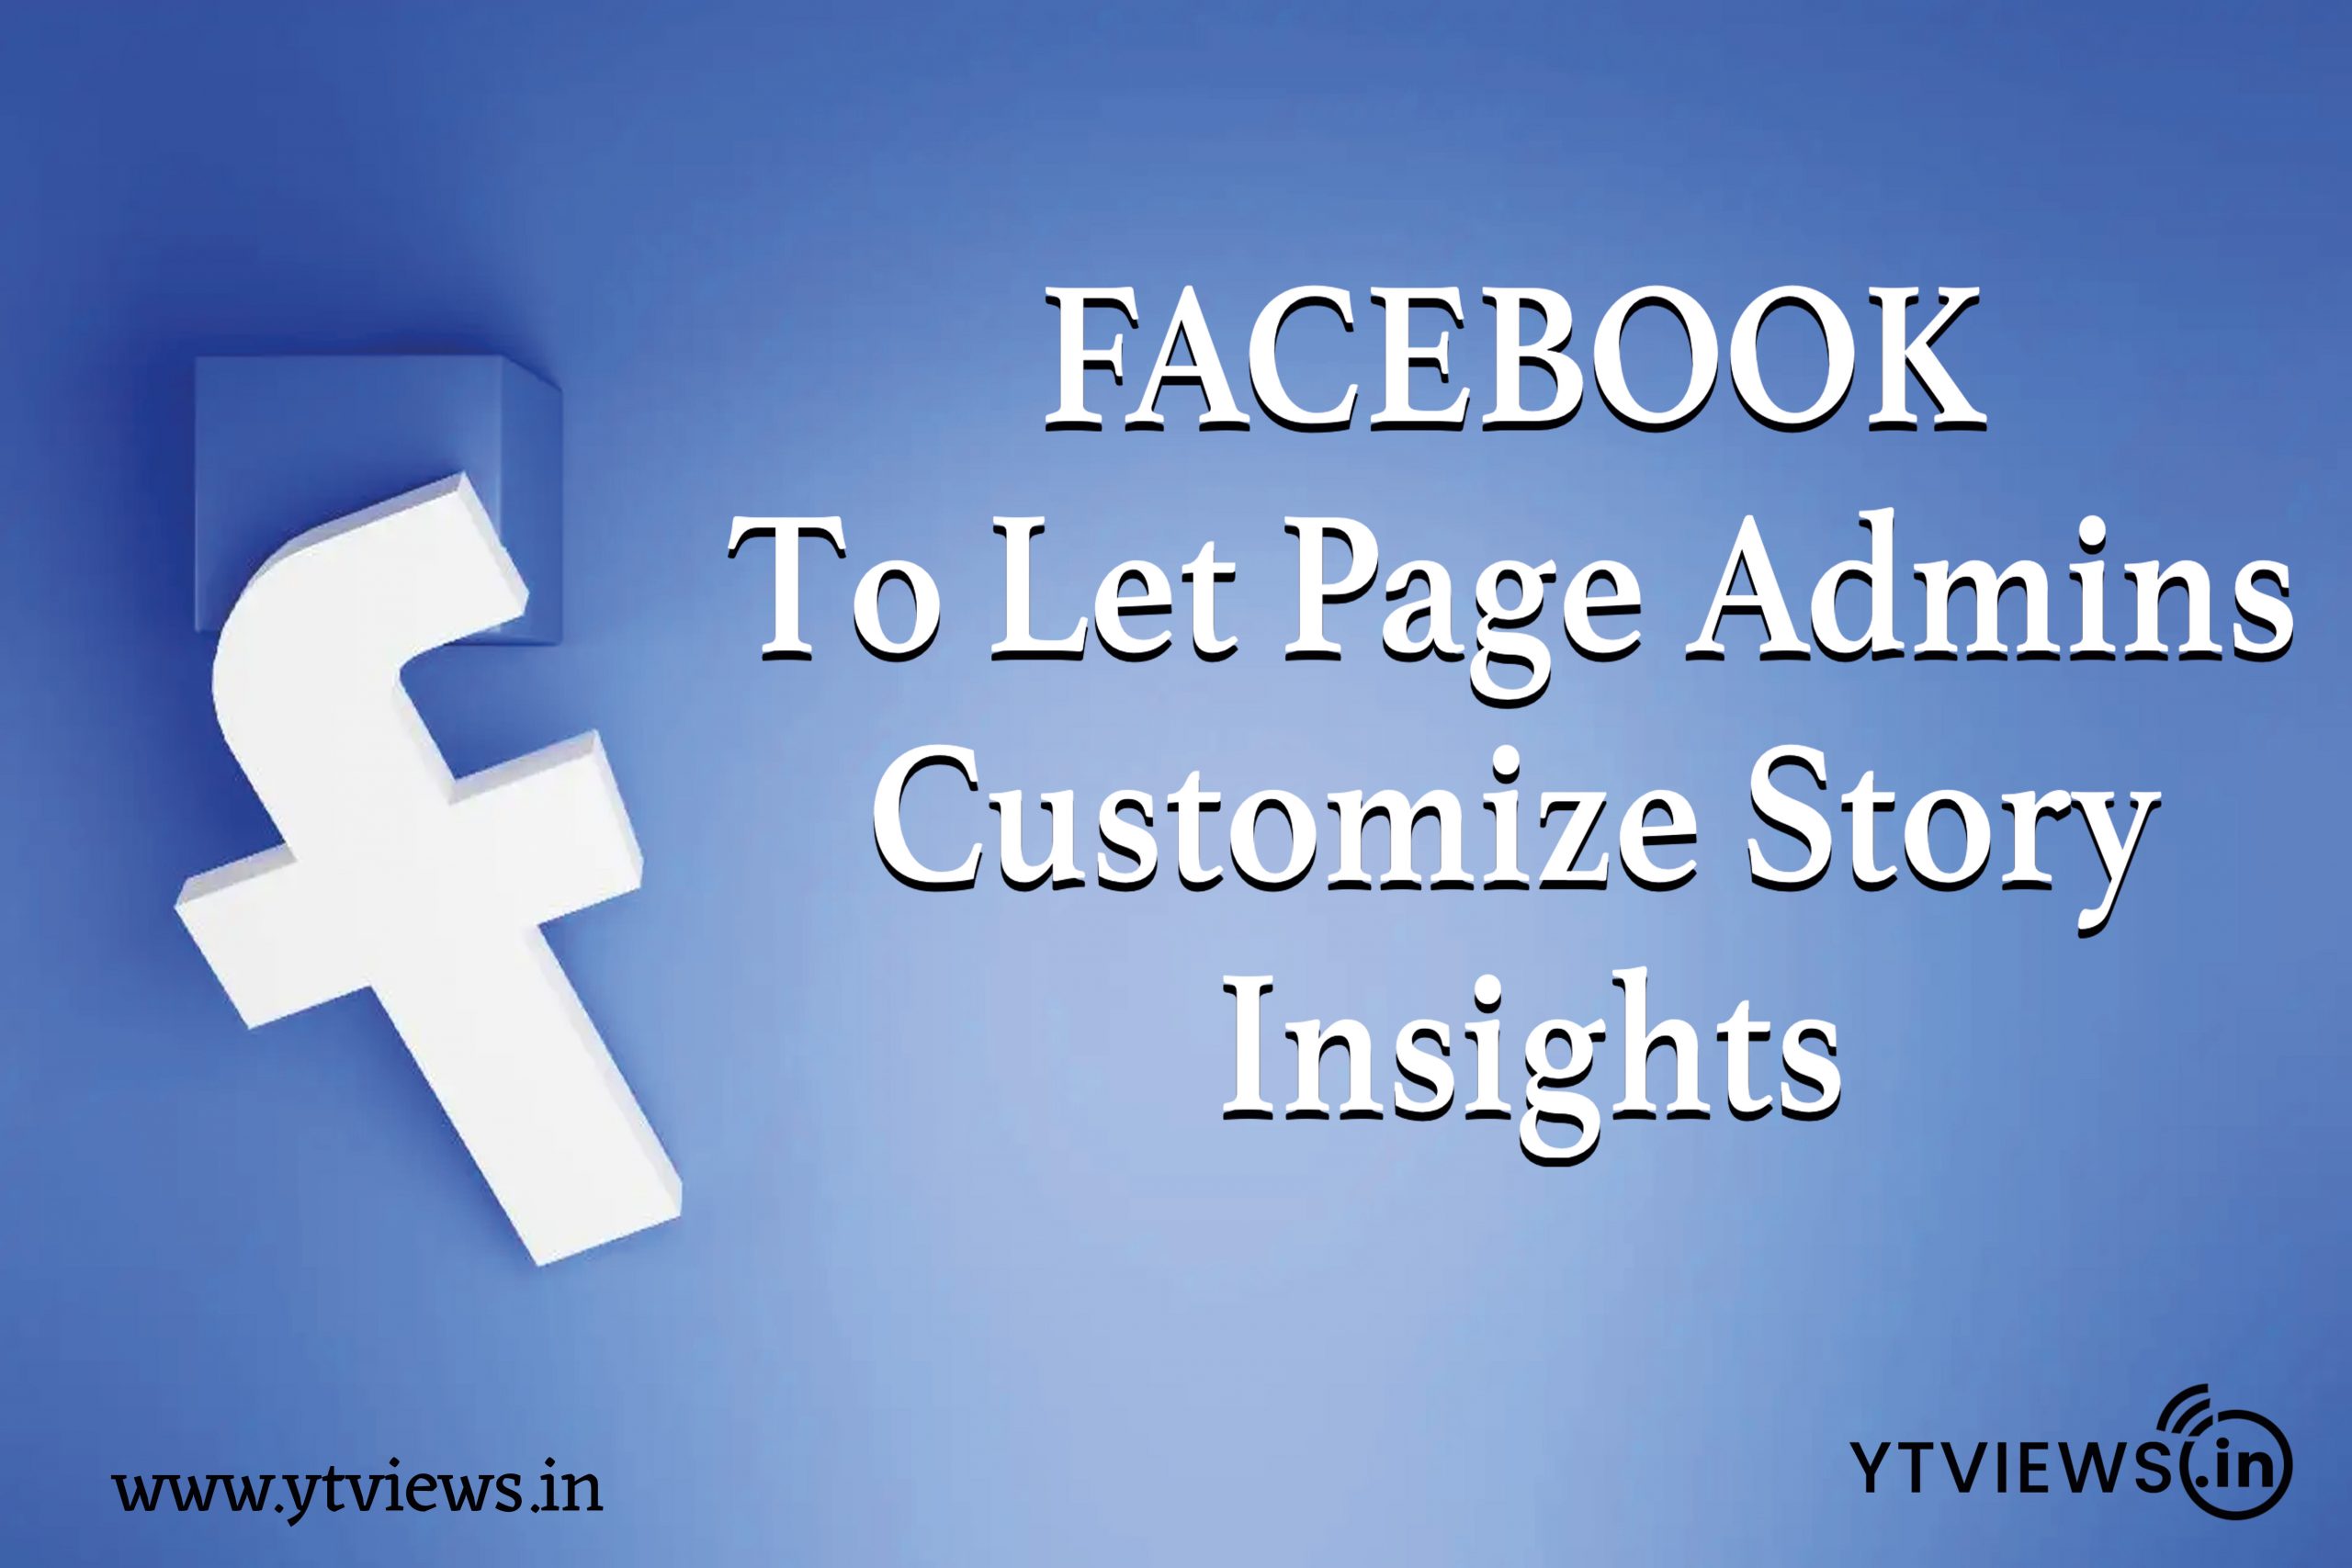 Facebook to let page admins customize Story Insights